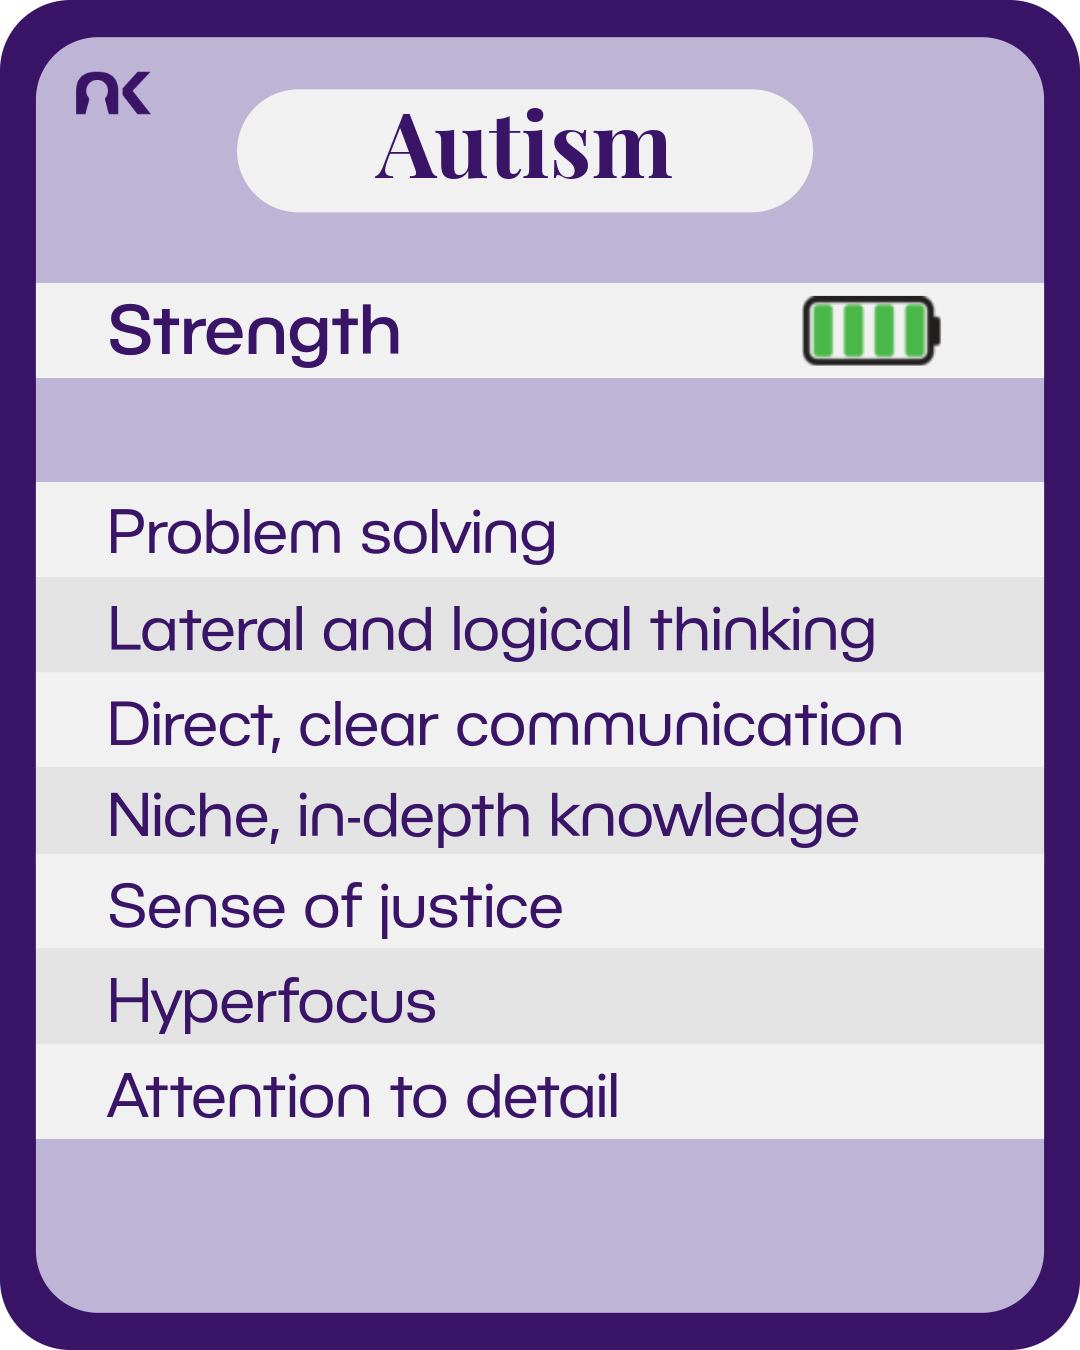 An information card made to look like it is from a card game. Next to the subtitle "strength" is a battery with green bars to show full charge. Text says: "Autism. Strength. Problem solving; Lateral and logical thinking; Direct, clear communication; Niche, in-depth knowledge; Sense of justice; Hyperfocus; Attention to detail."